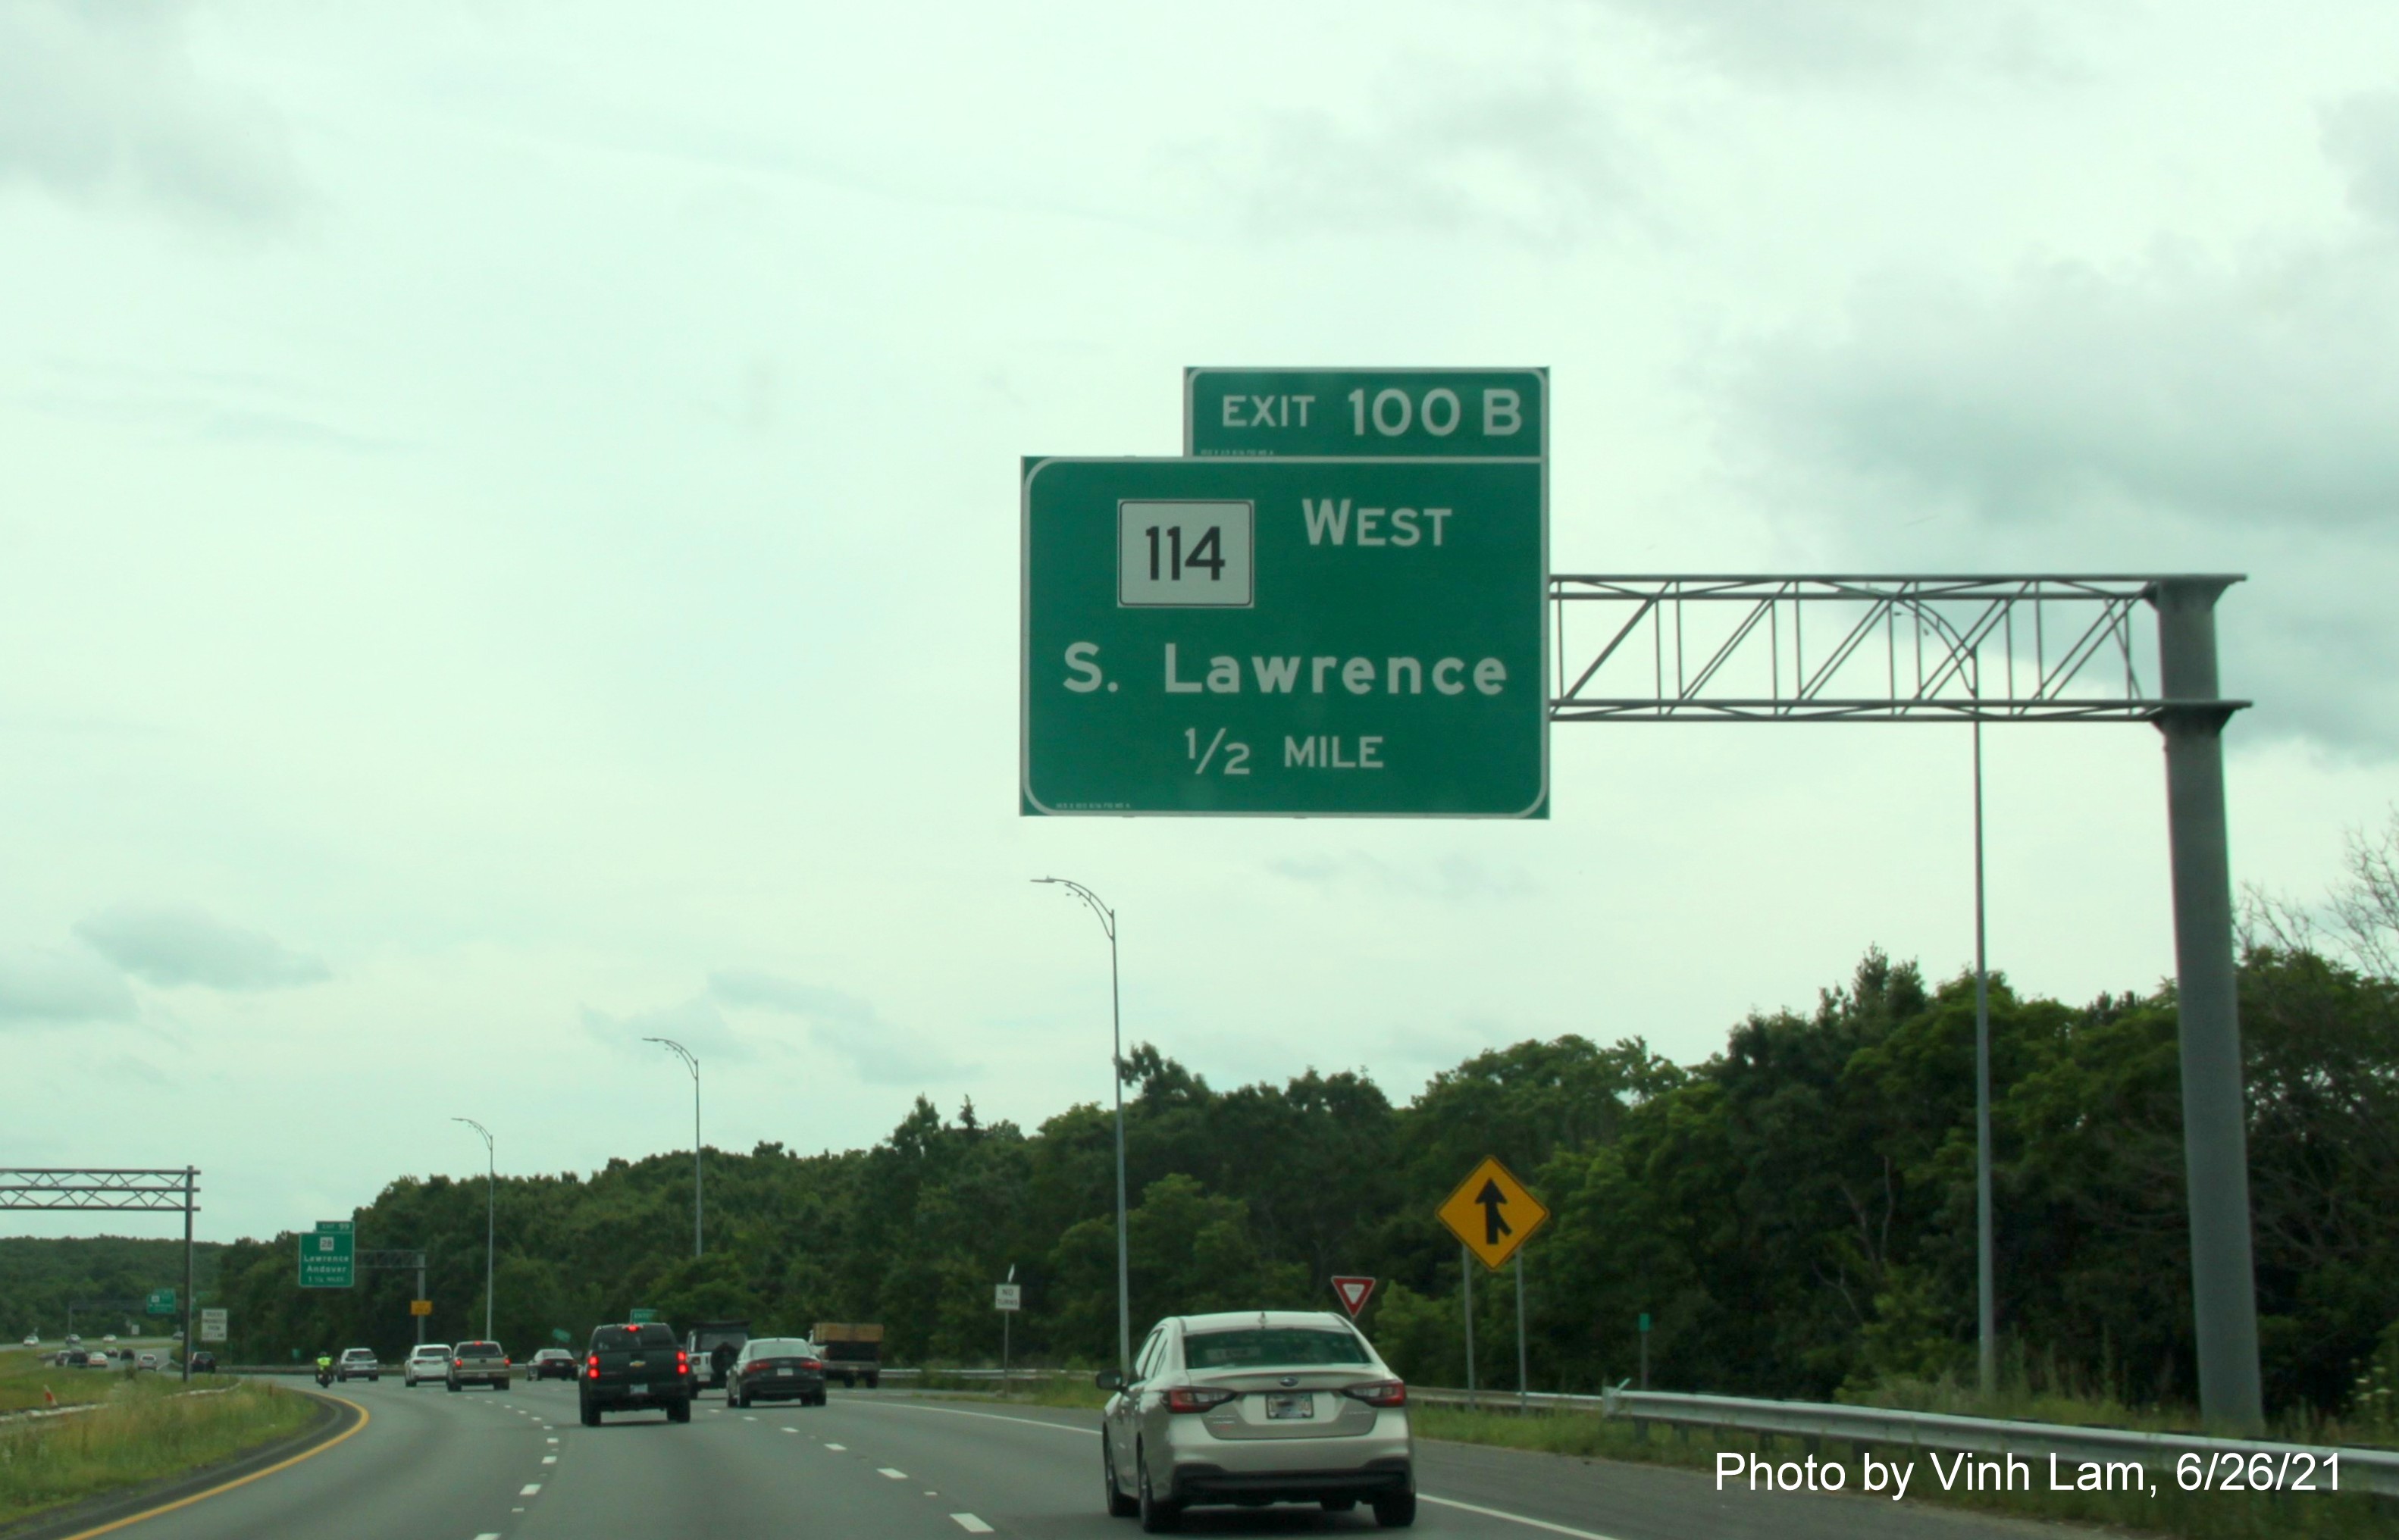 Image of 1/2 mile advance overhead sign for MA 114 exits with new milepost exit numbers on I-495 South in North Andover, by Vinh Lam, June 2021